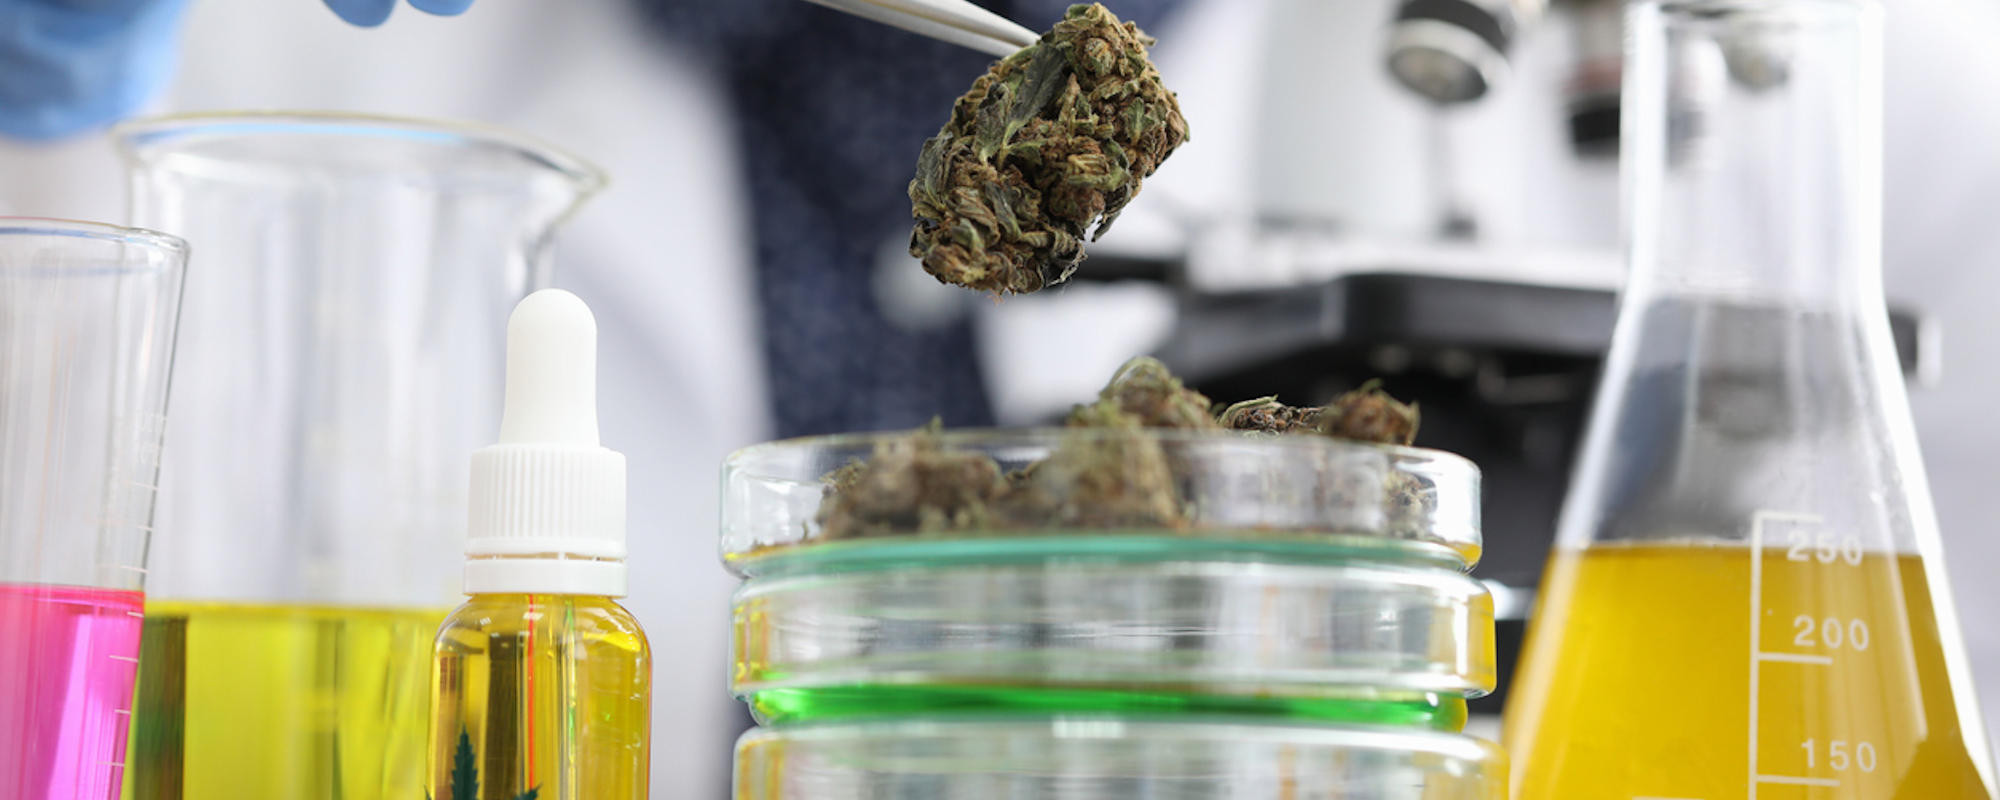 Key Considerations for Microbial Contaminants Testing in Cannabis